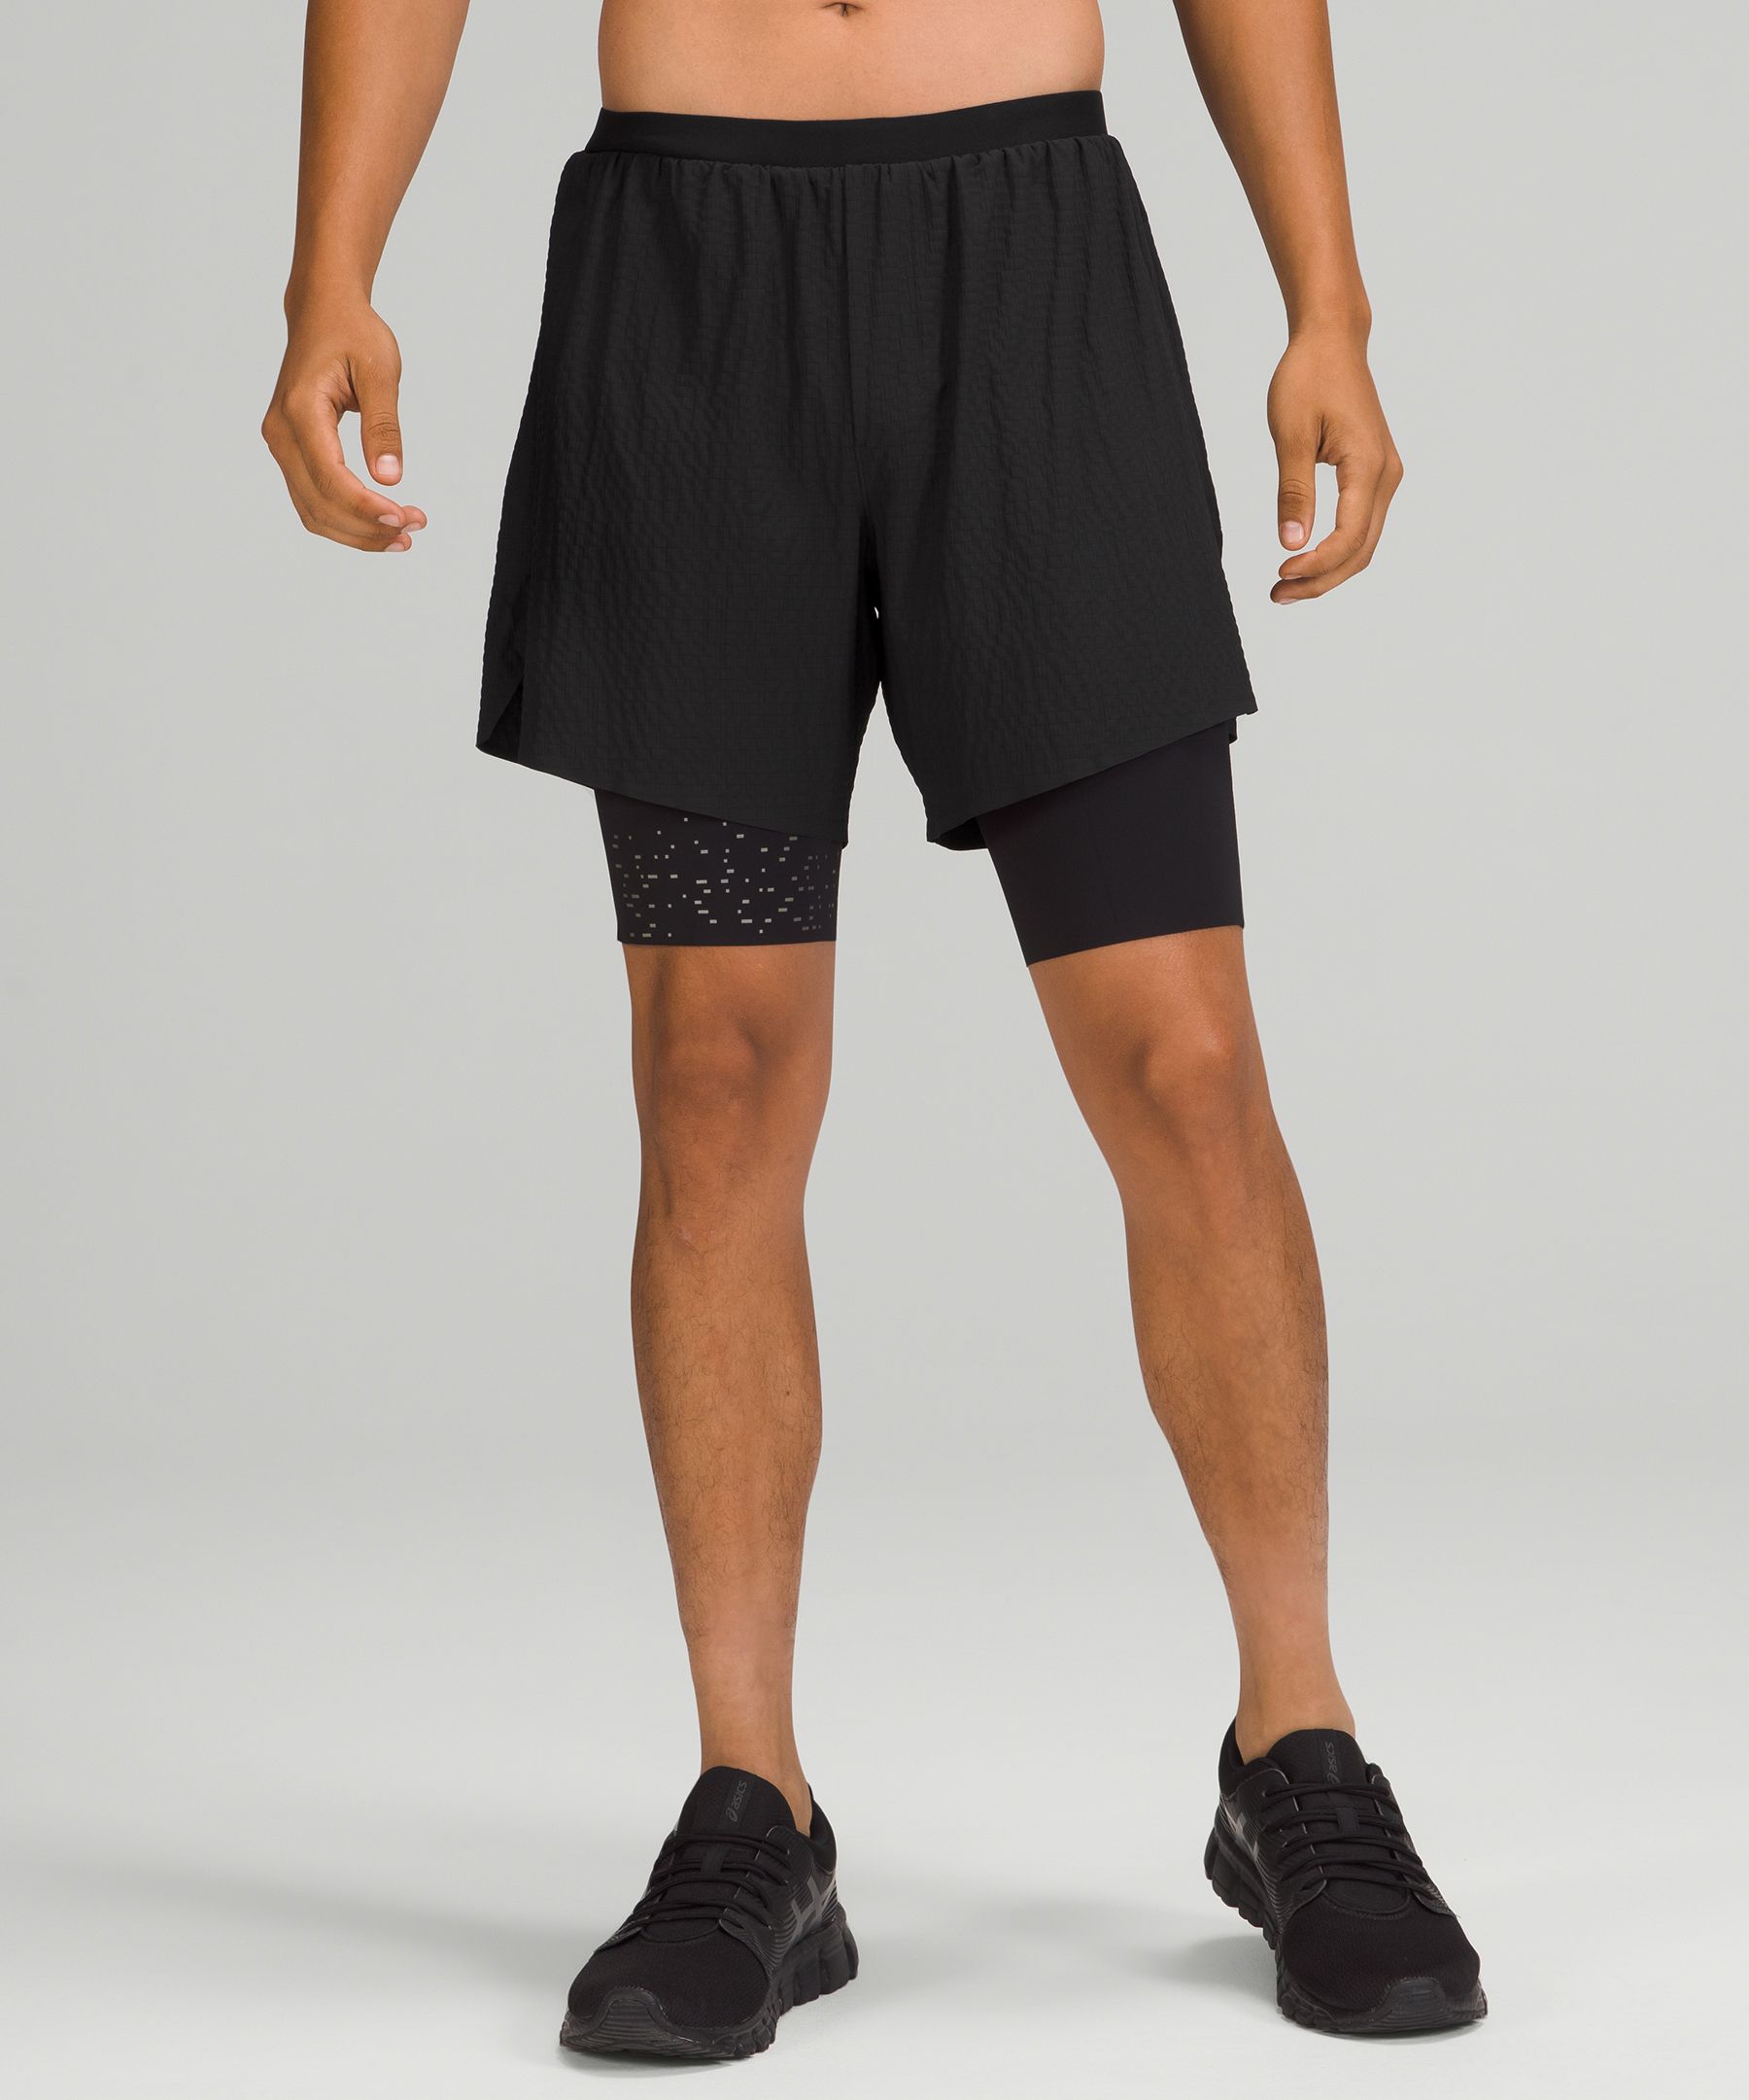 Surge Lined Short 6 *Special Edition, Shorts